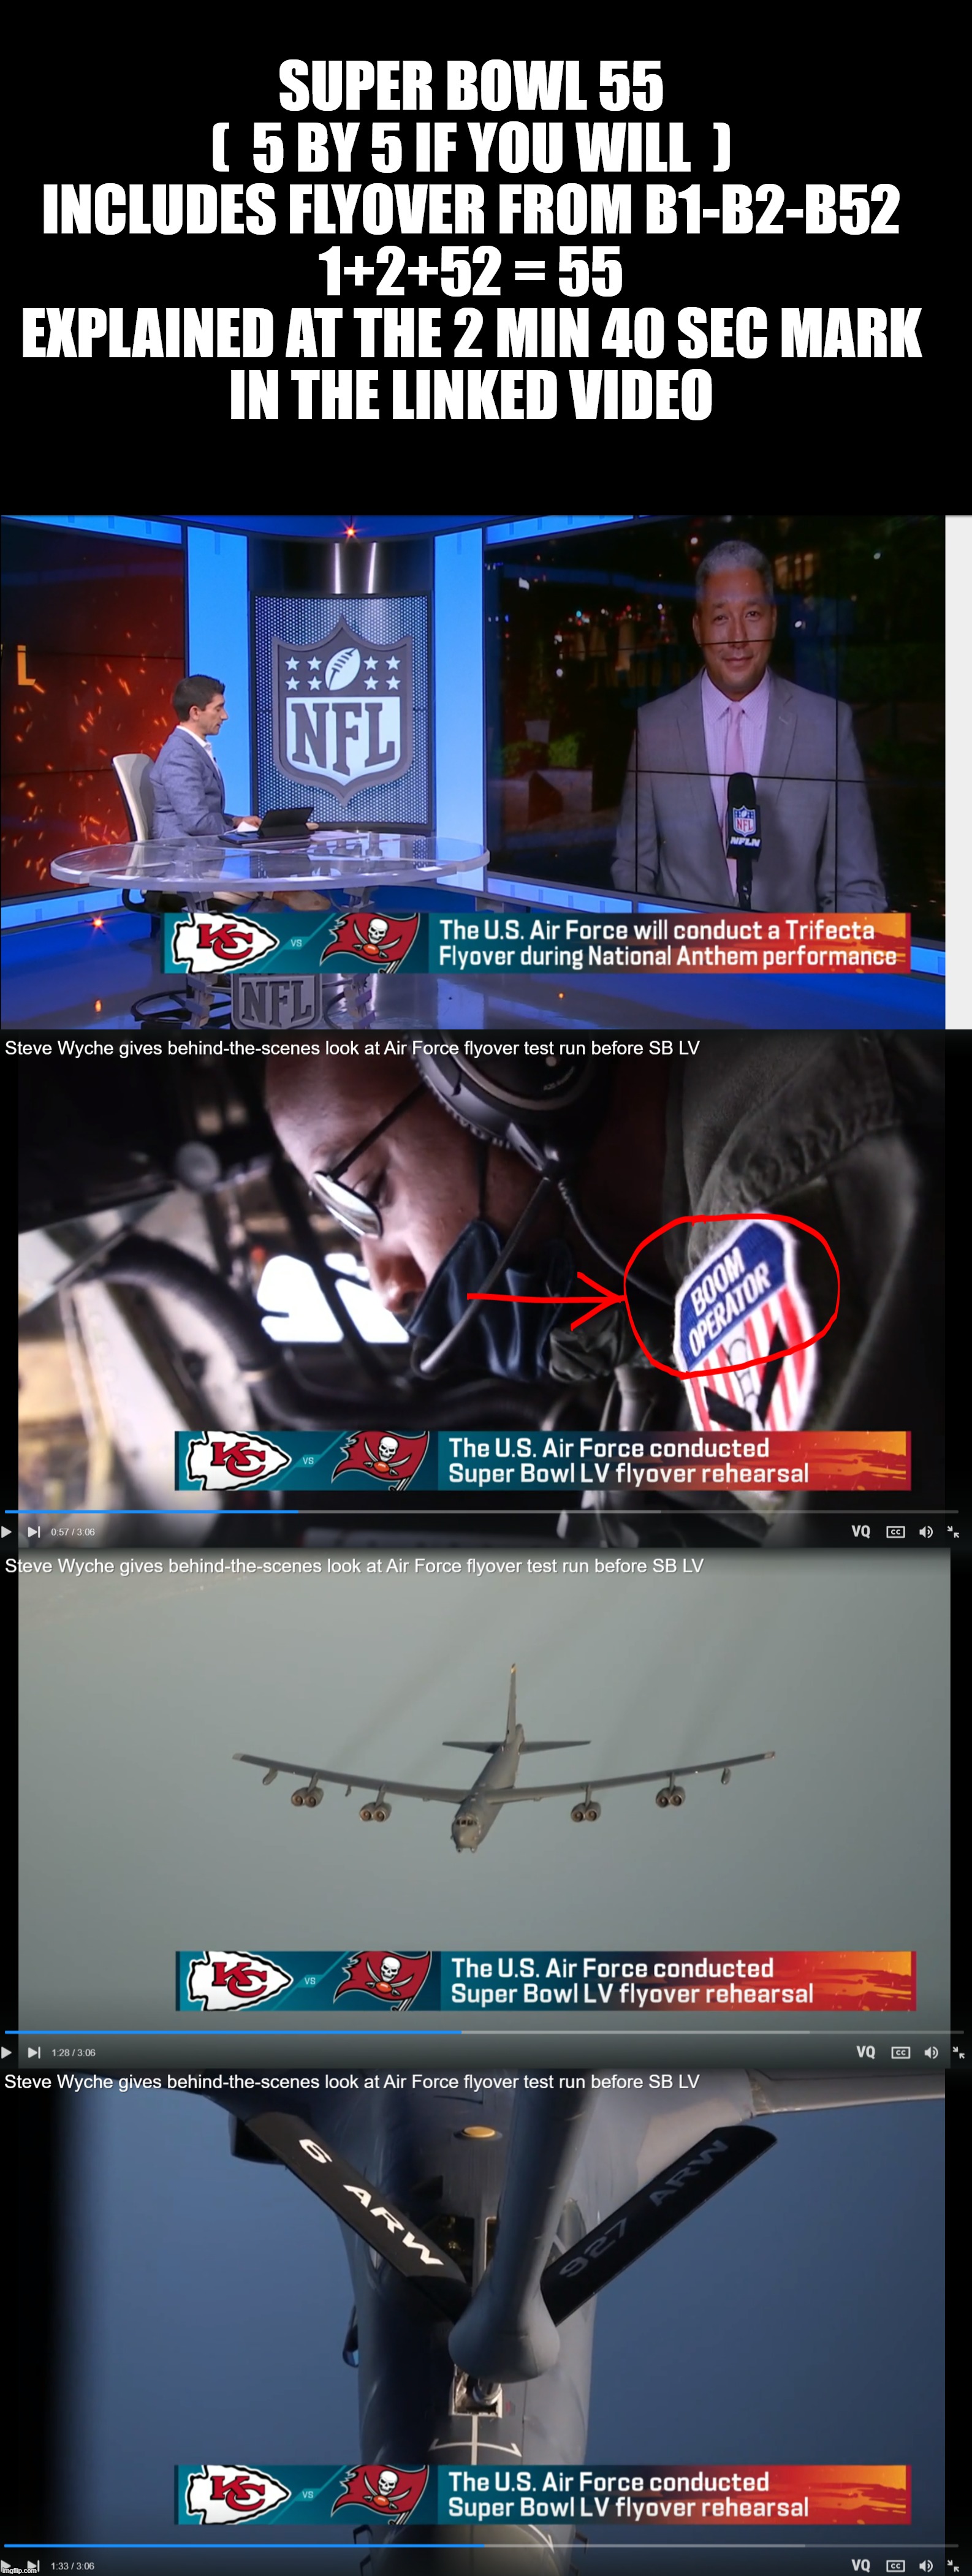 SUPER BOWL 55
(  5 BY 5 IF YOU WILL  )
INCLUDES FLYOVER FROM B1-B2-B52
1+2+52 = 55

EXPLAINED AT THE 2 MIN 40 SEC MARK
IN THE LINKED VIDEO | made w/ Imgflip meme maker